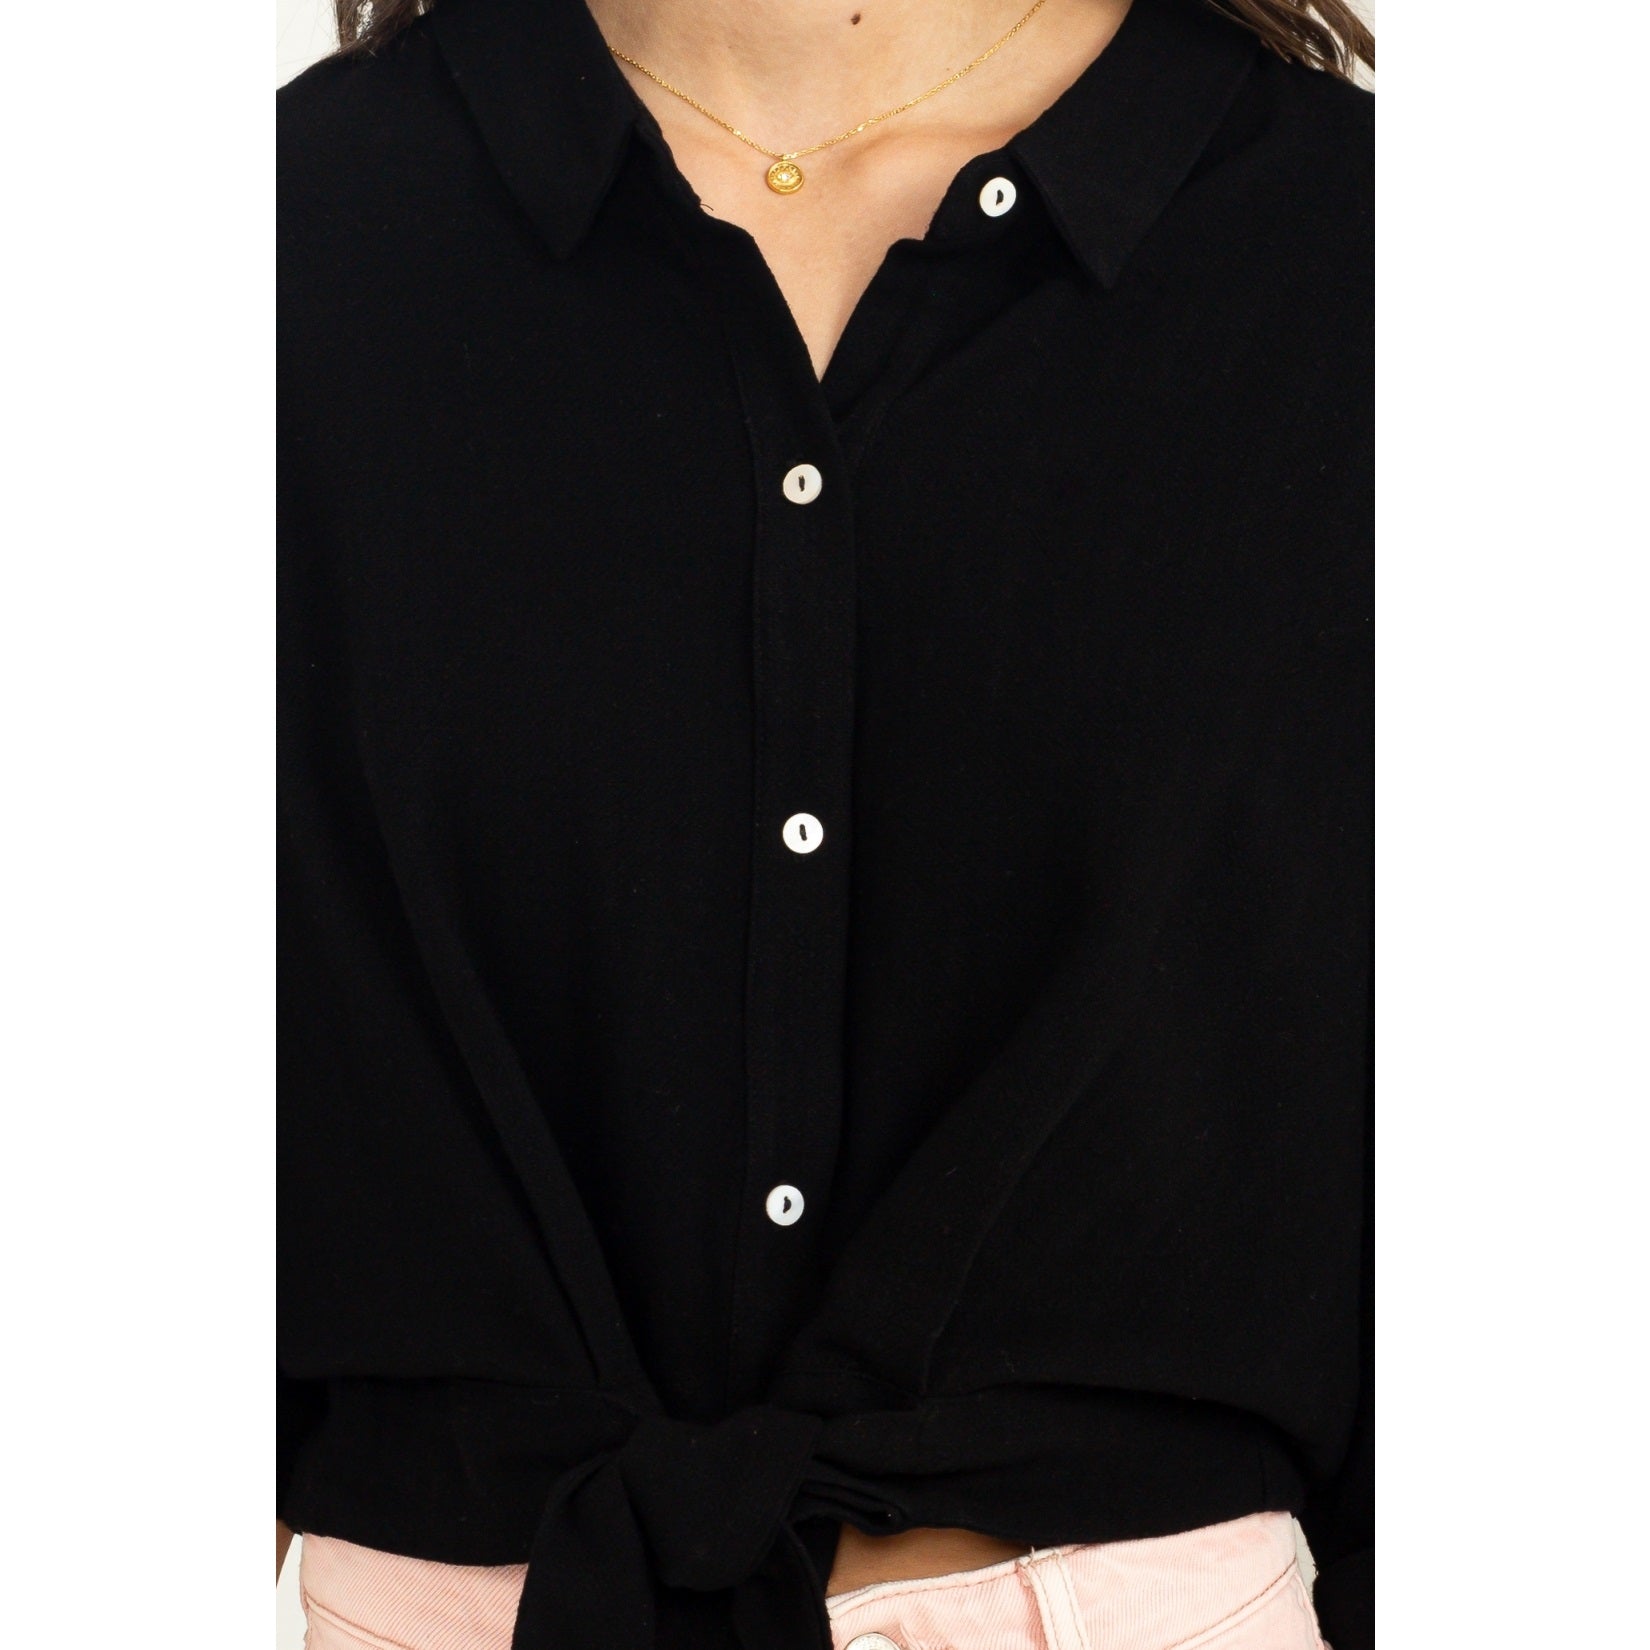 Classic Babe Black Tie-Front Top